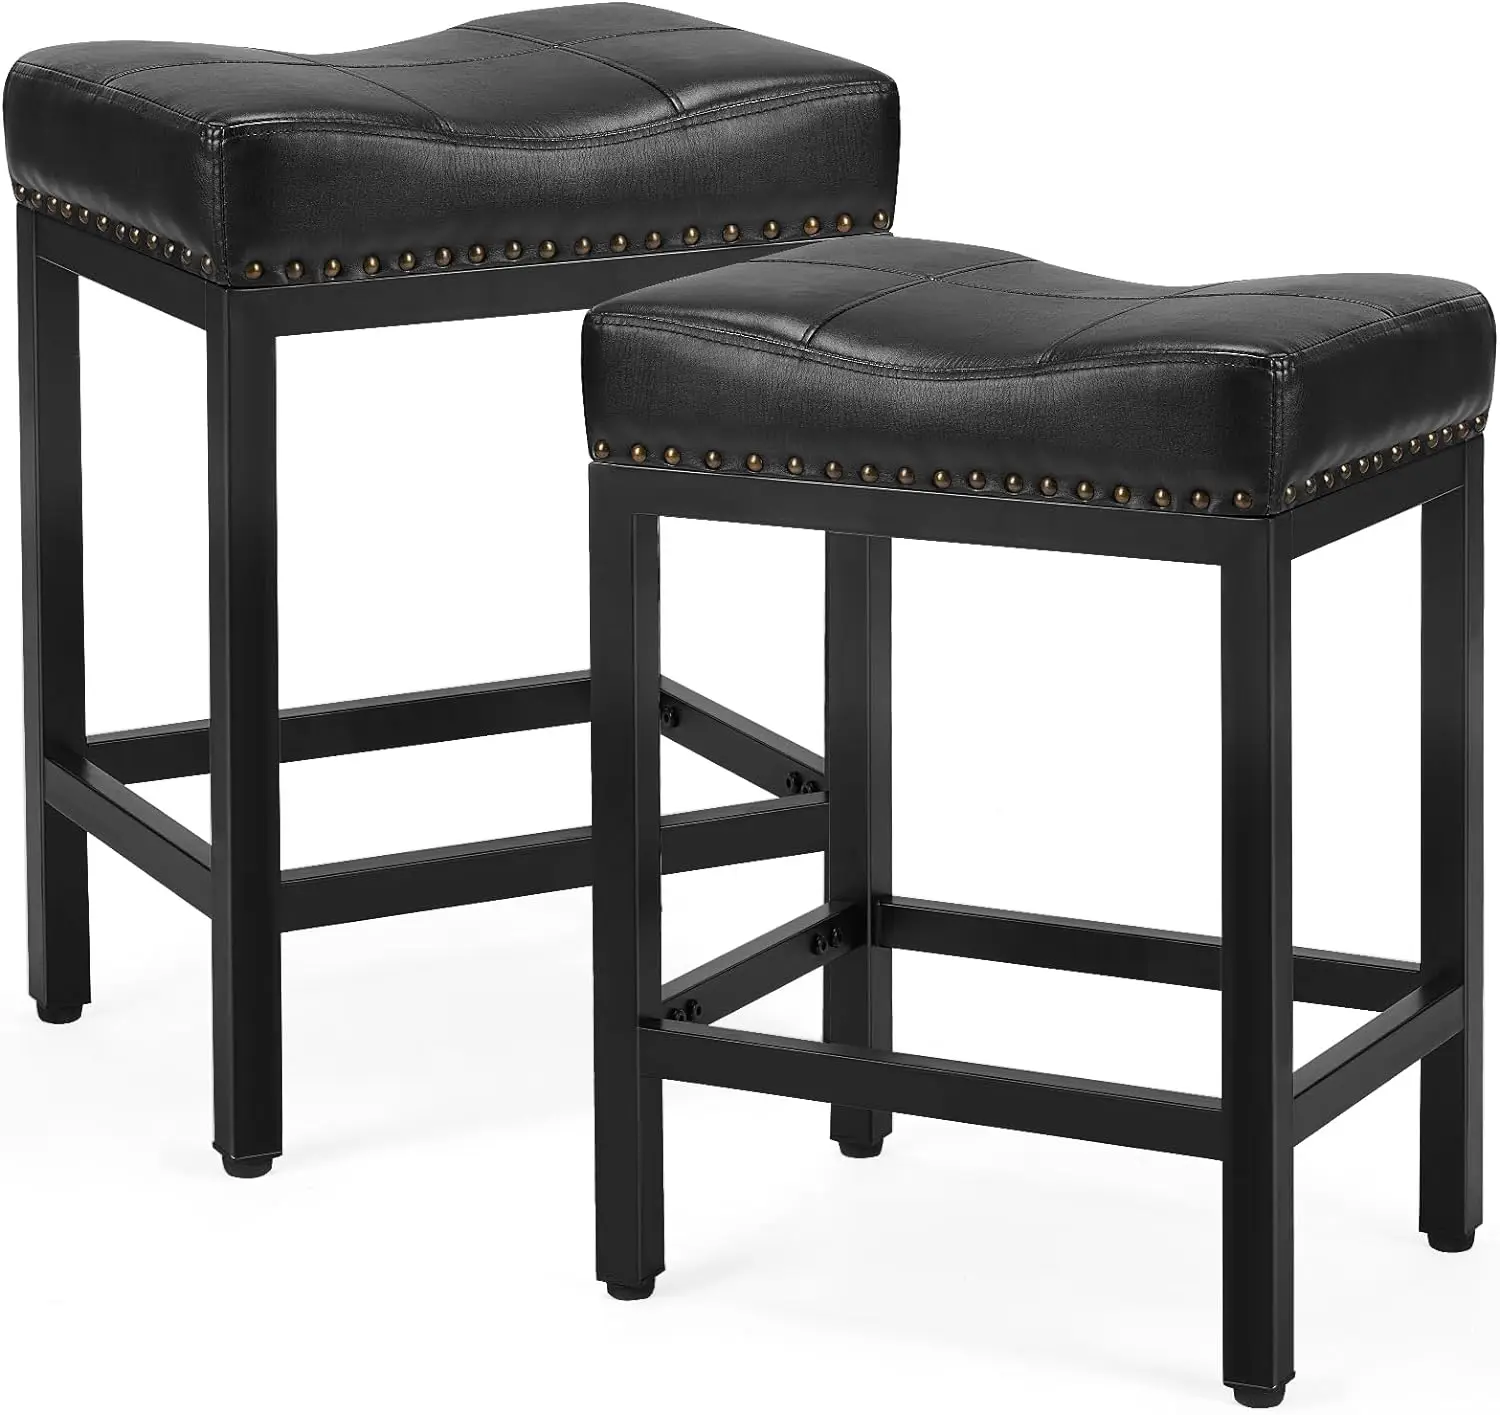 

Sweetcrispy Bar Stools Set of 2， 24 inch Counter Height Bar Stools, Upholstered Modern Kitchen Barstools with Metal Base,